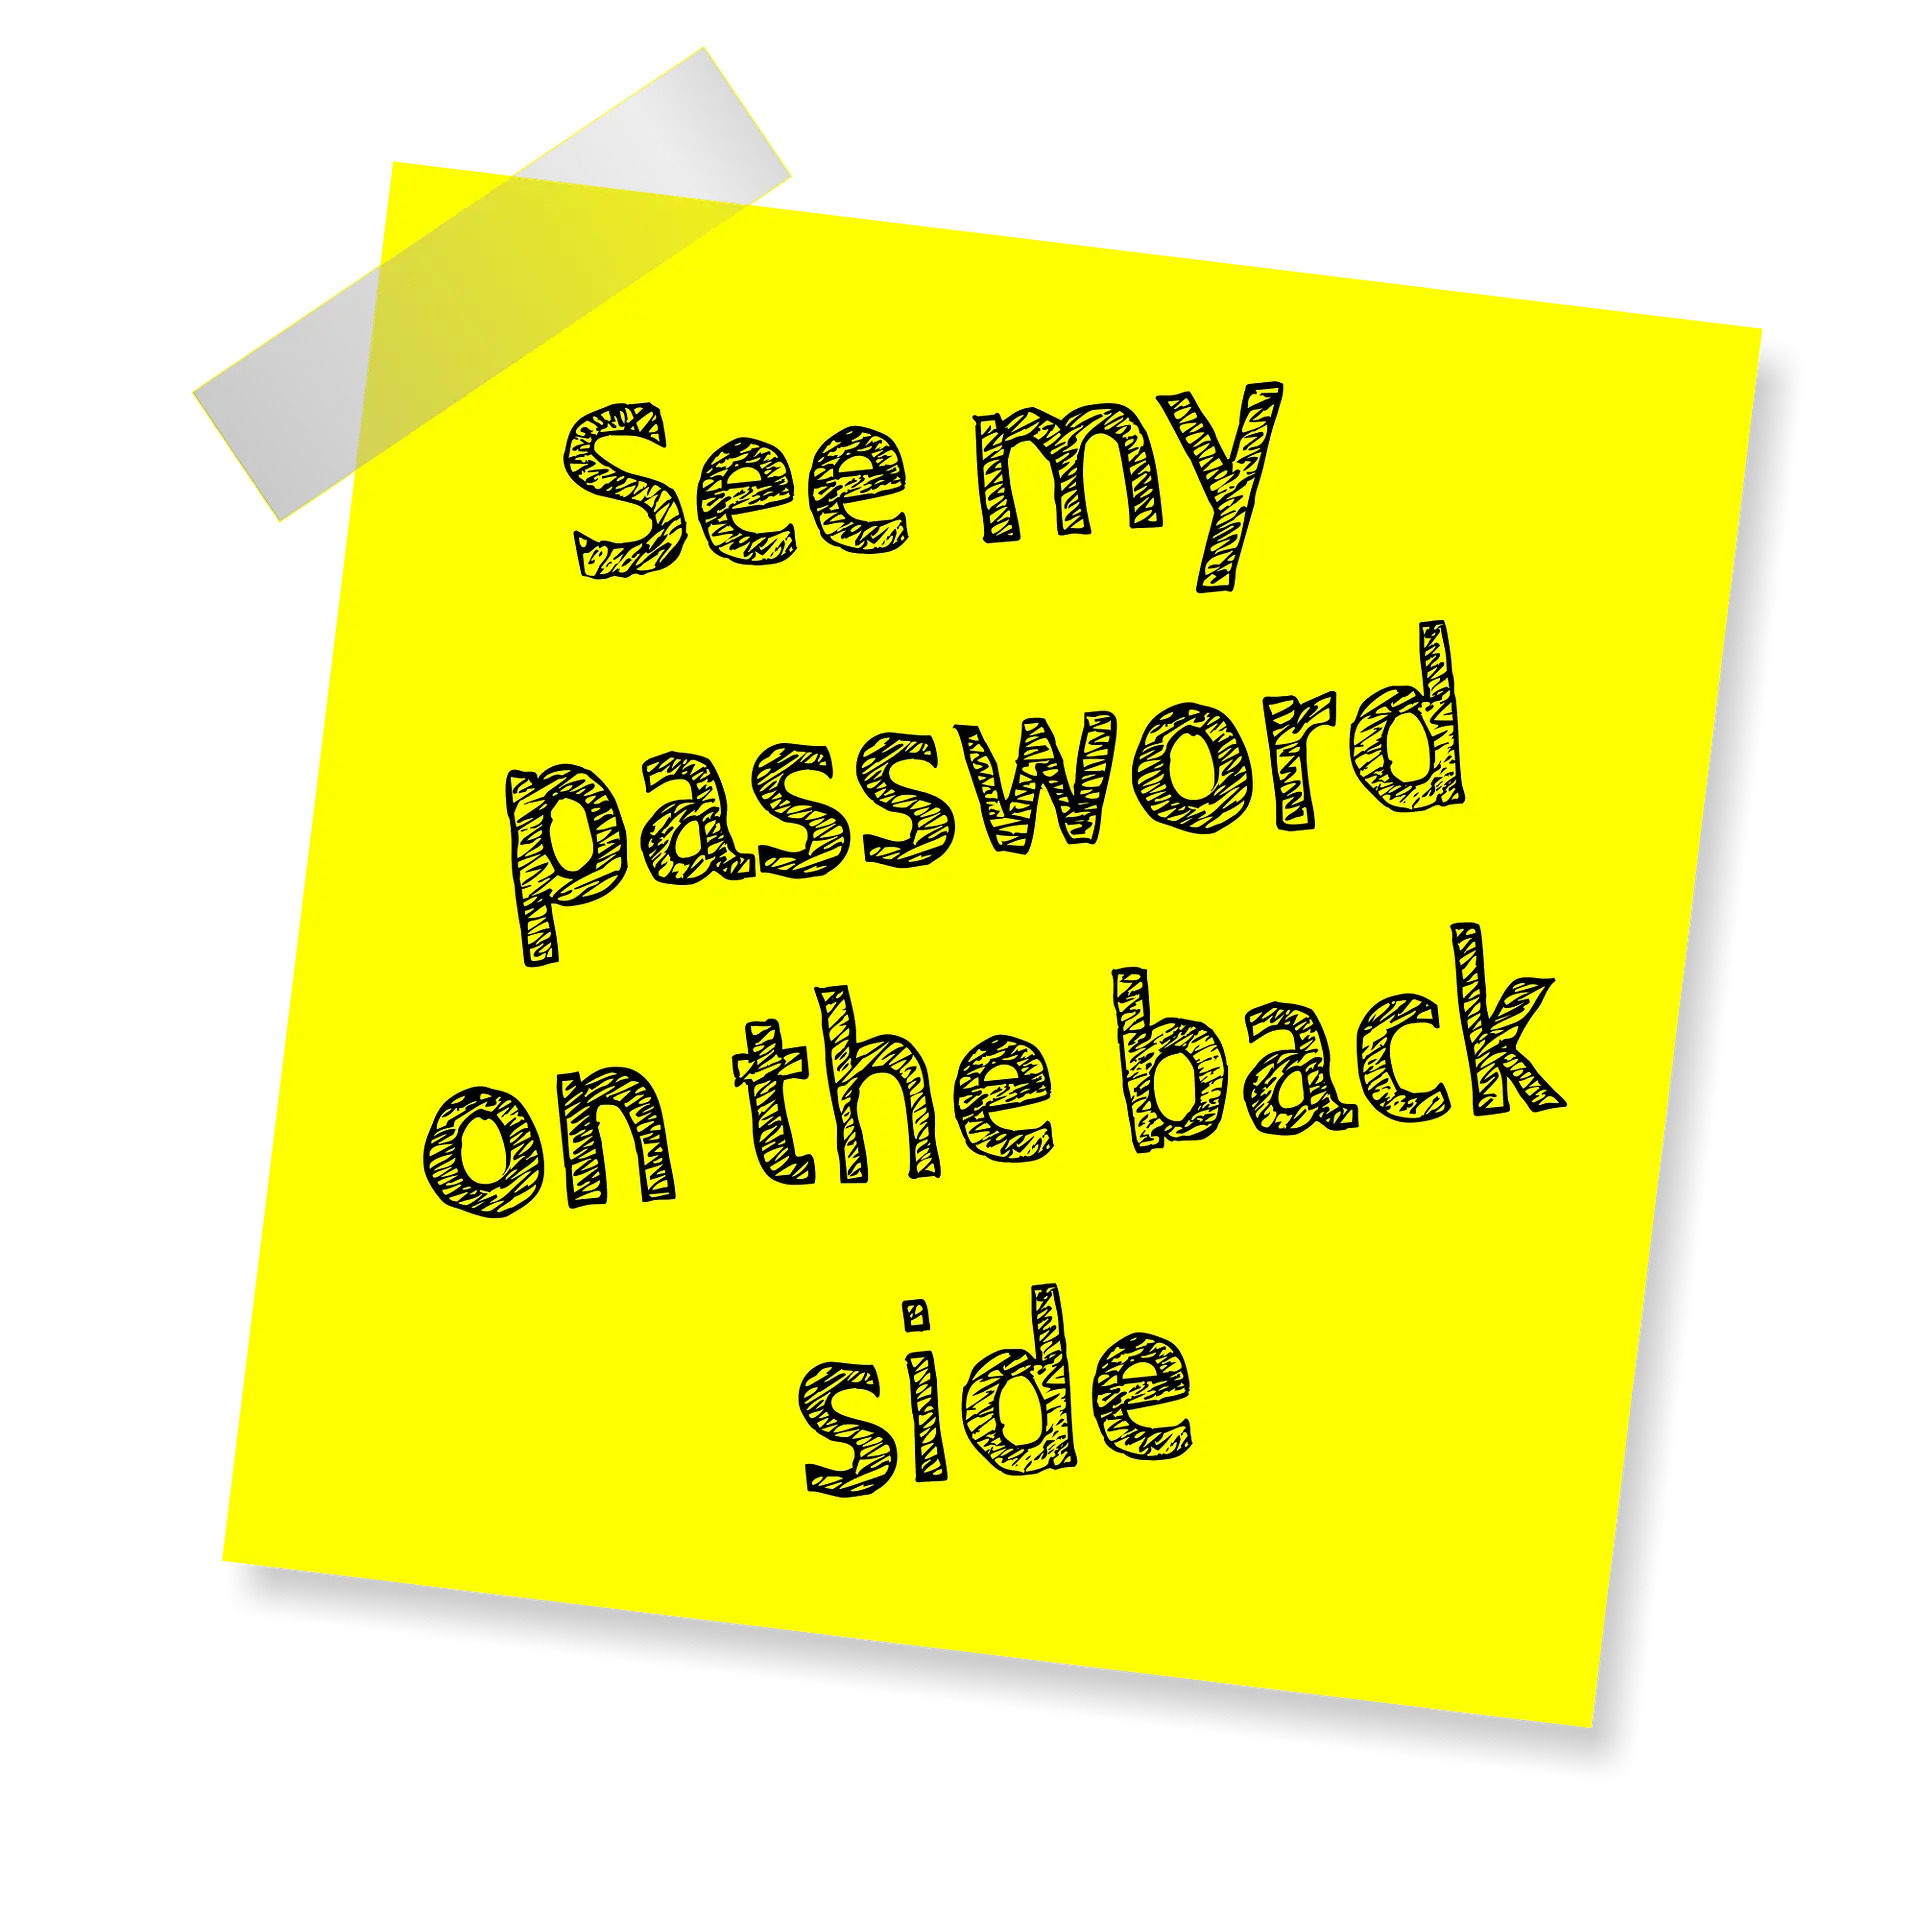 Passwords and sticky notes